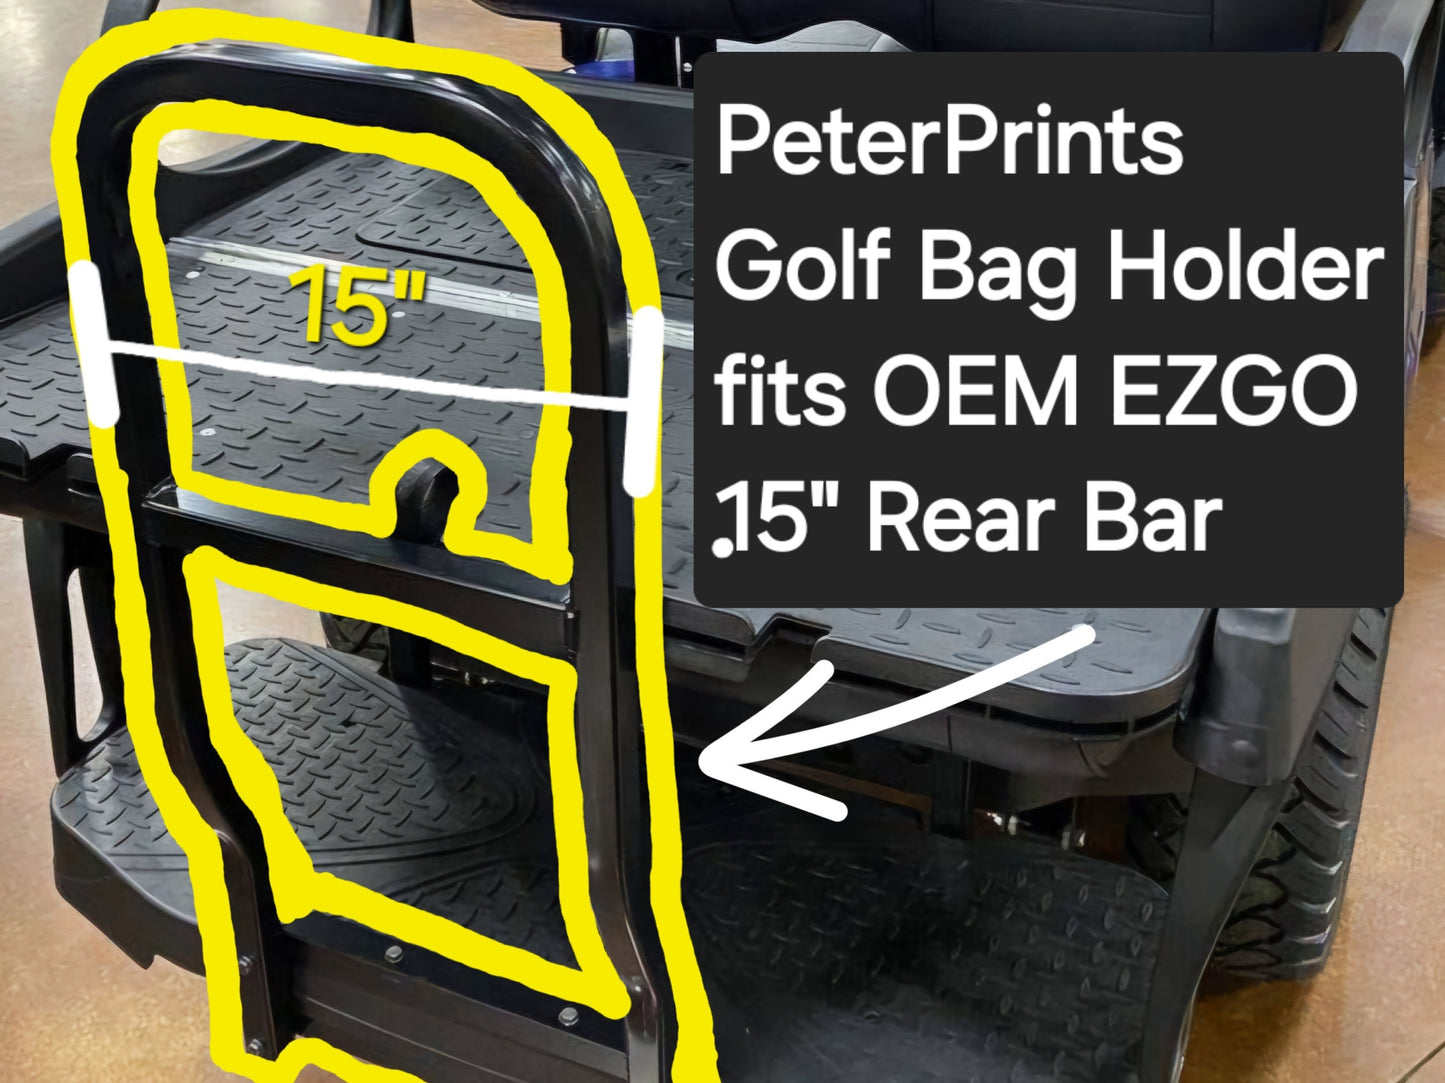 EZGO Golf Cart Golf Bag Holder Attachment, Easily Removable, No Drilling Required, fits S4, VALOR, RXV w/ 15" Rear Flip Seat Square Grab Bar